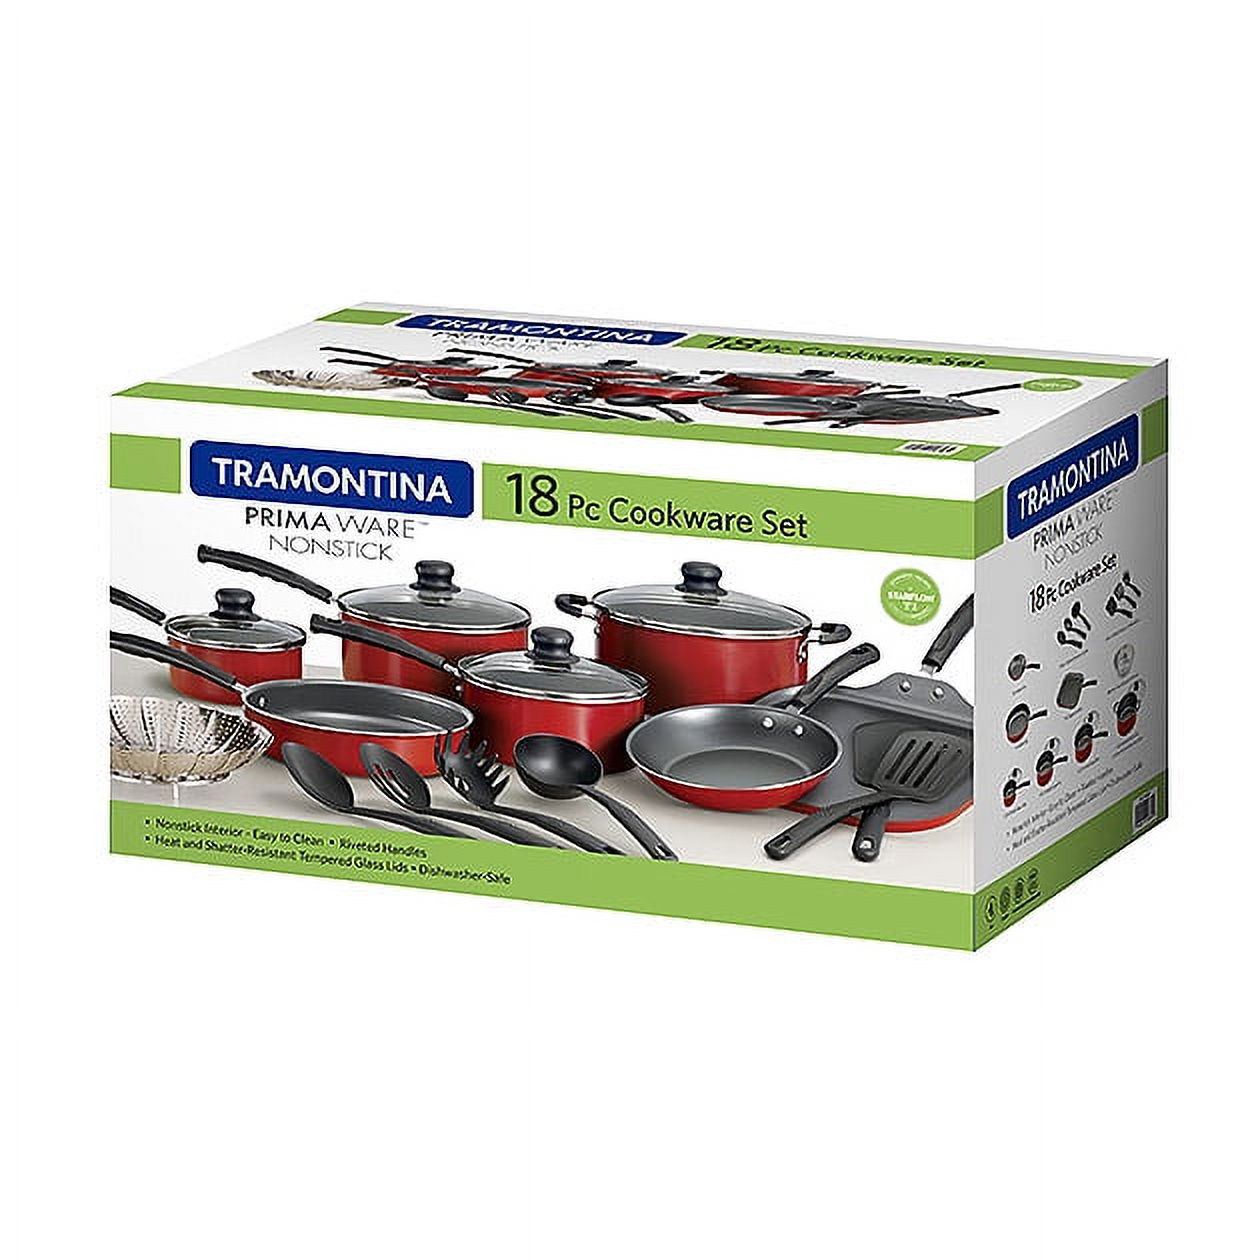 Tramontina Primaware 18 Piece Non-stick Cookware Set, Red - image 3 of 26